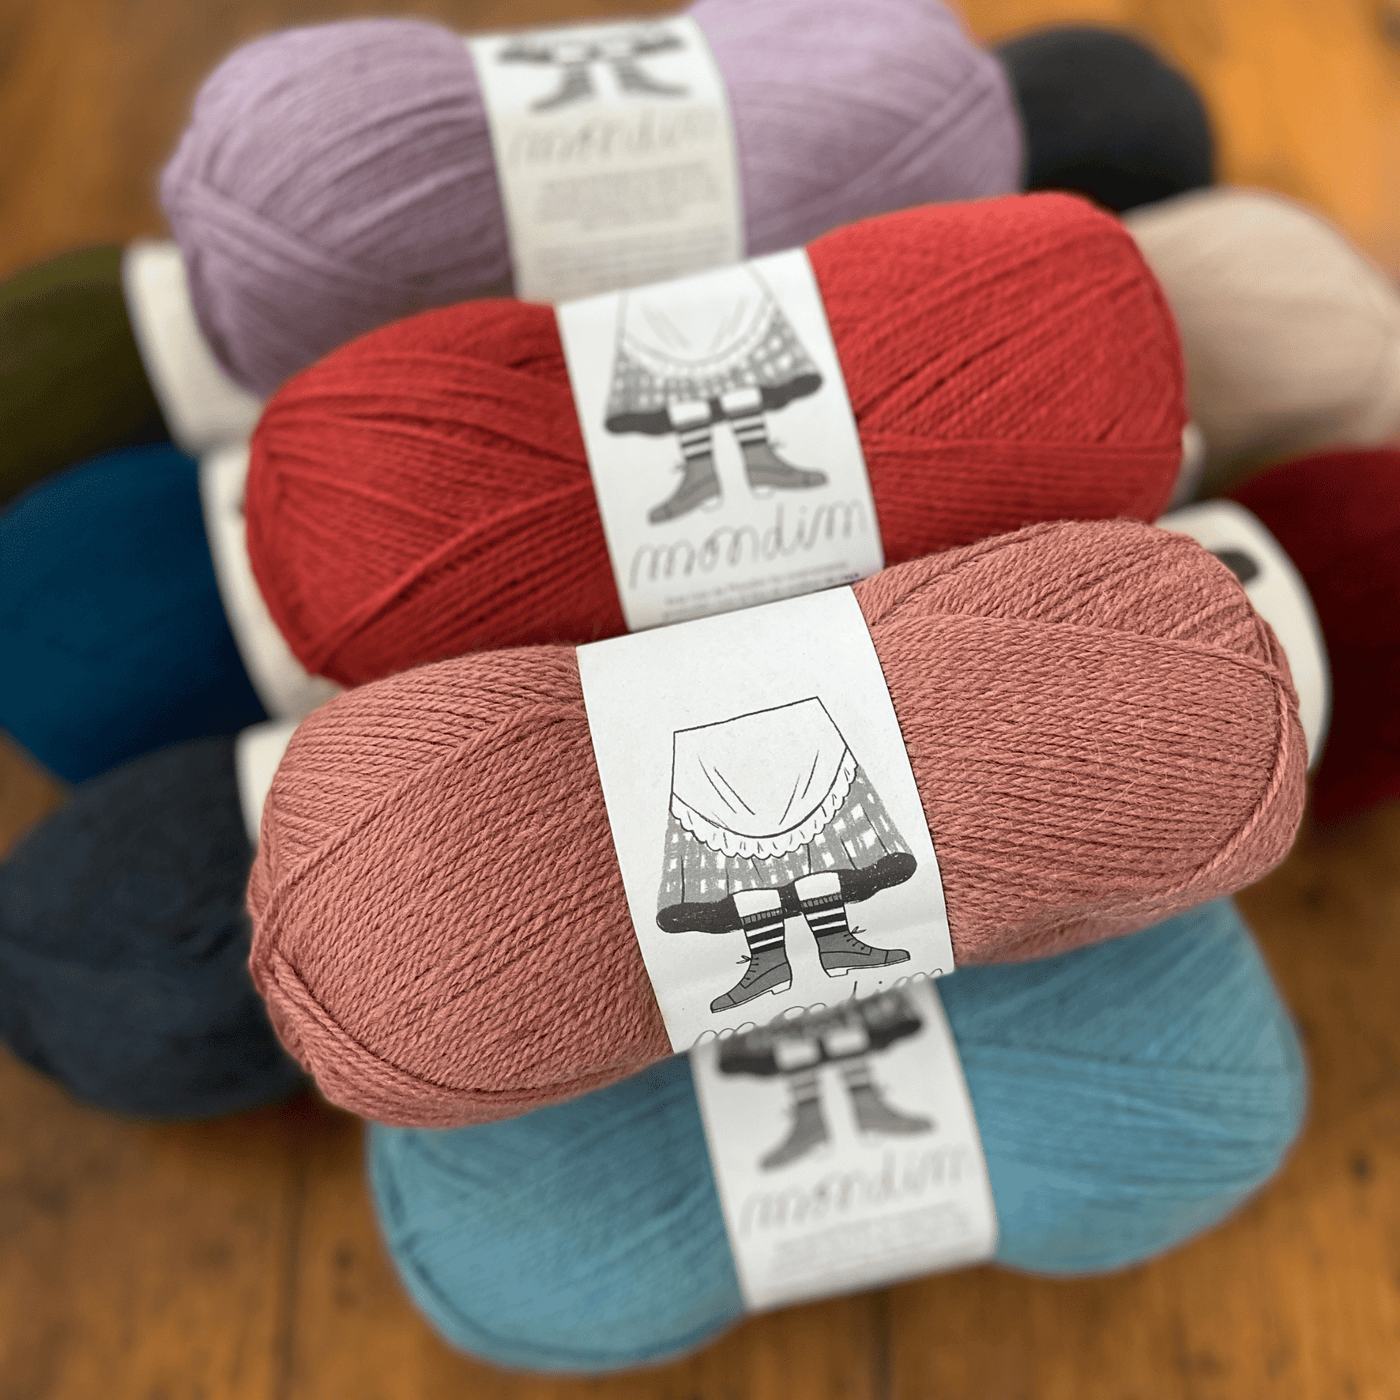 The Woolly Thistle Retrosaria Mondim Fingering Weight Yarn in multiple colors like pink, red, purple, blue, green, cream, black, burgundy, and more